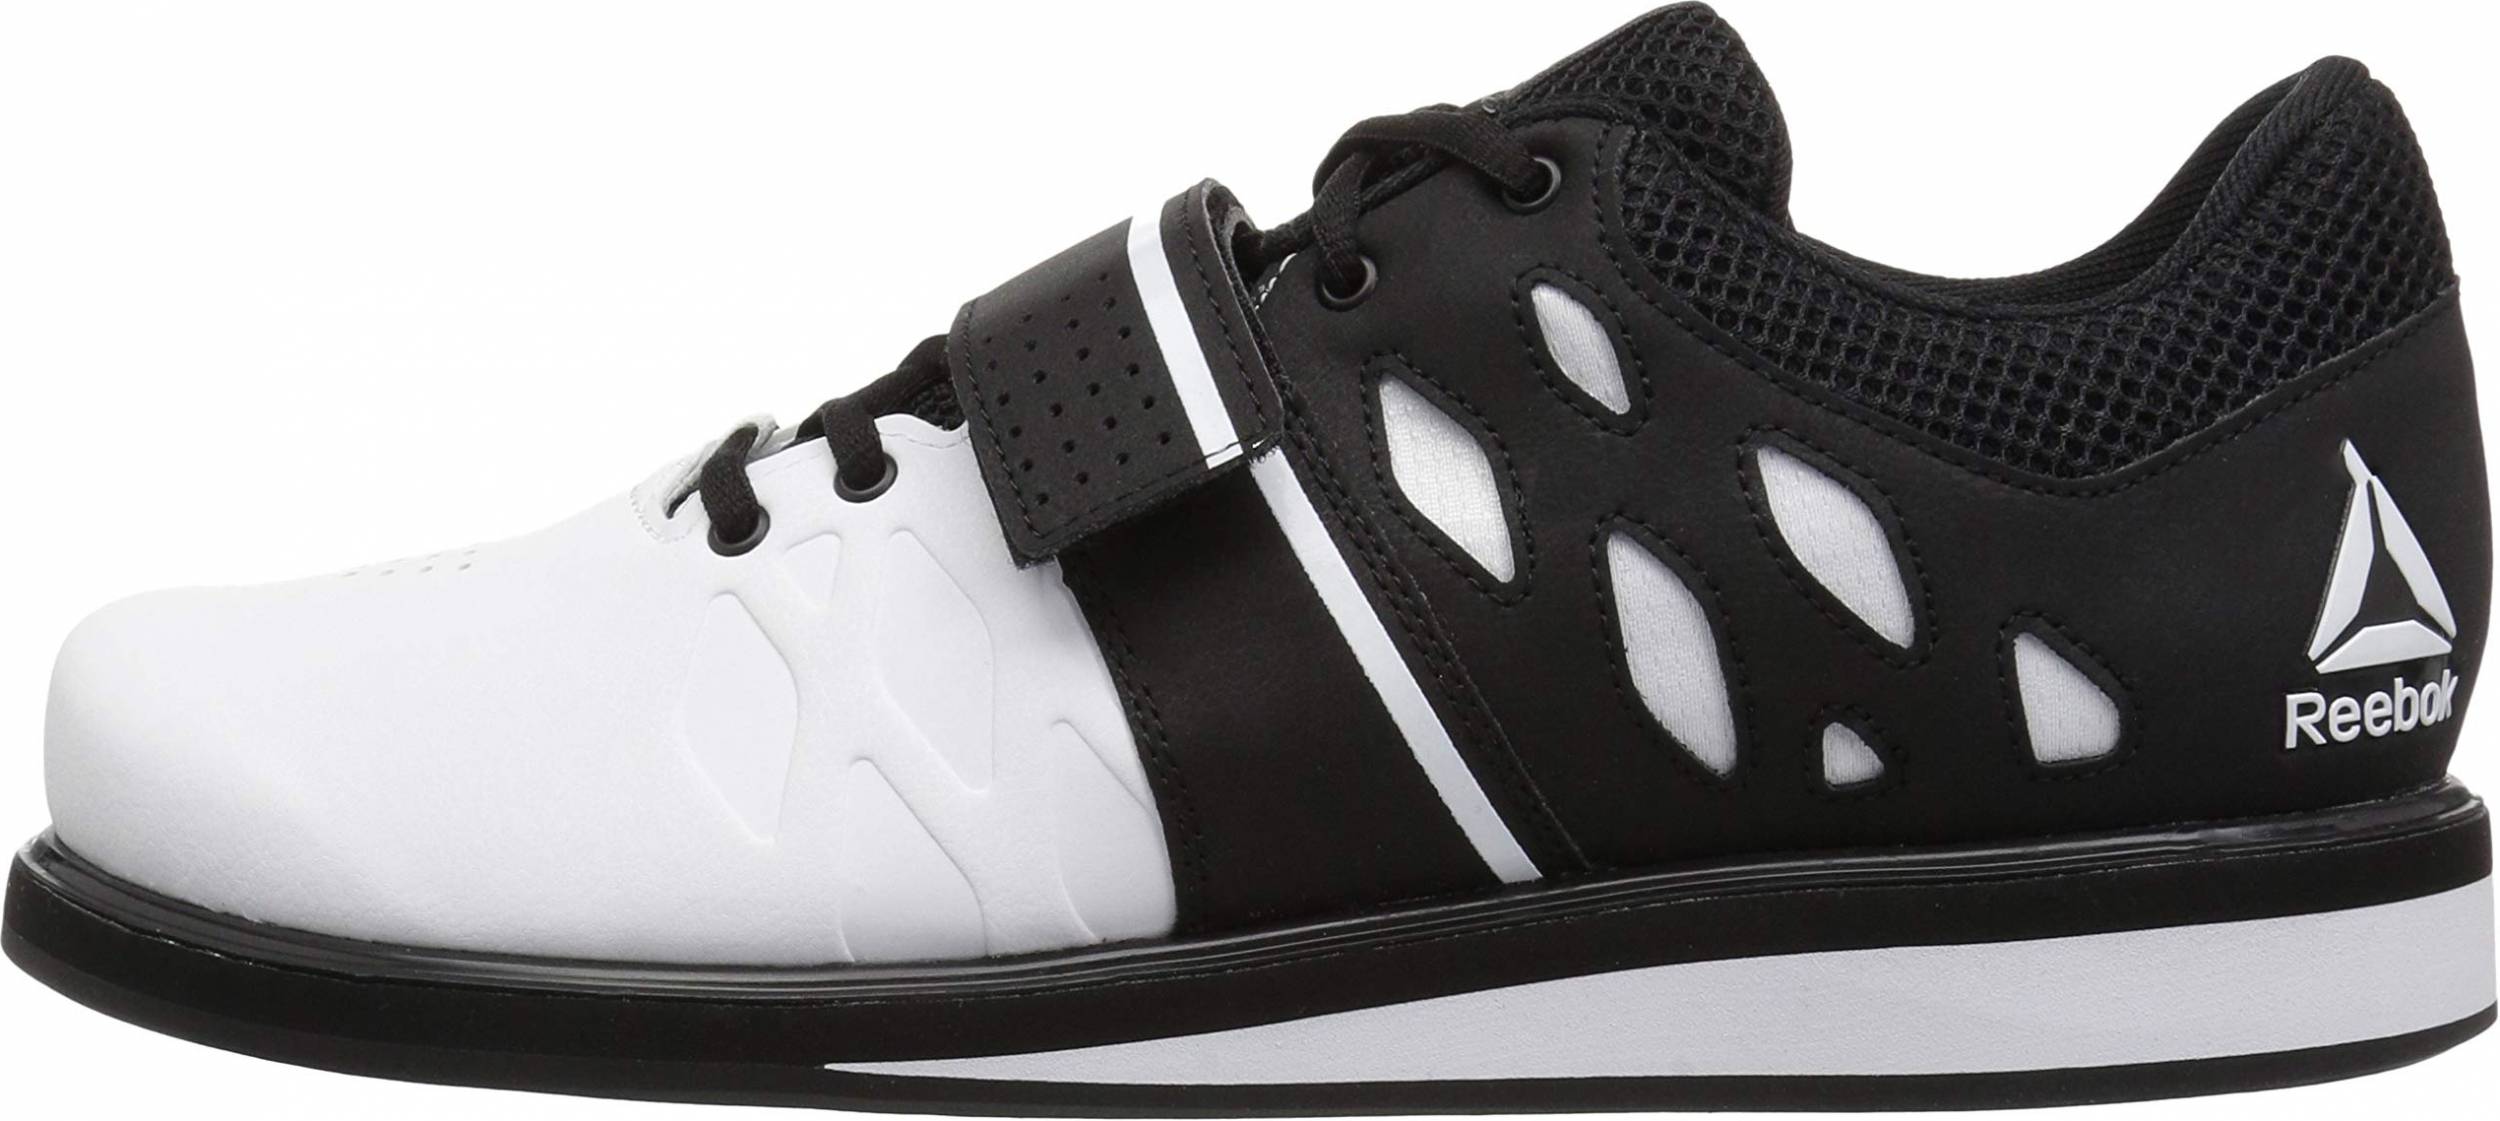 Save 39% on Reebok Weightlifting Shoes 